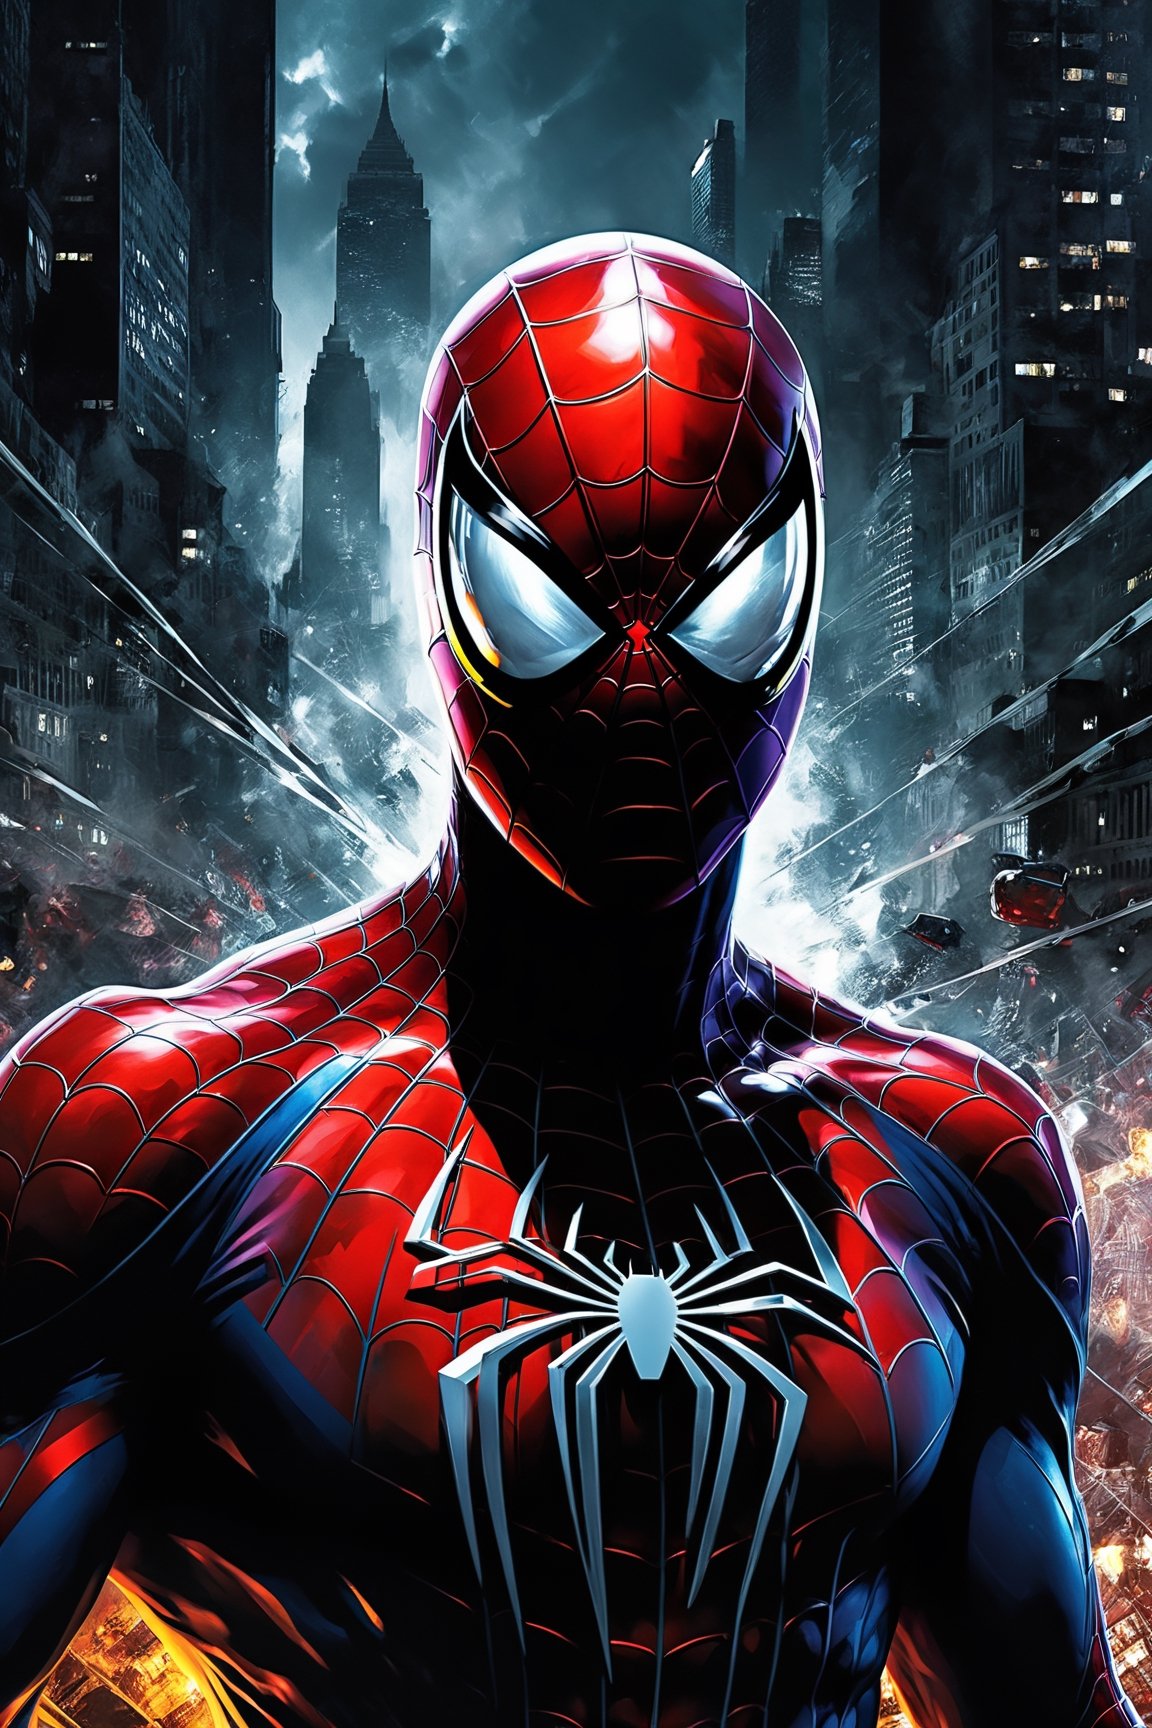 spiderman wallpaper, foreboding, intense, detailed, ominous, reflective, action camera, fisheye lens, twilight, surreal photography, infrared film, abstract-realism, low-key studio lighting. hyperactive imagination, interactive, highly detailed image. Art's Style by Clayton Crain + Stjepan Sejic + Alessandro Cappuccio.